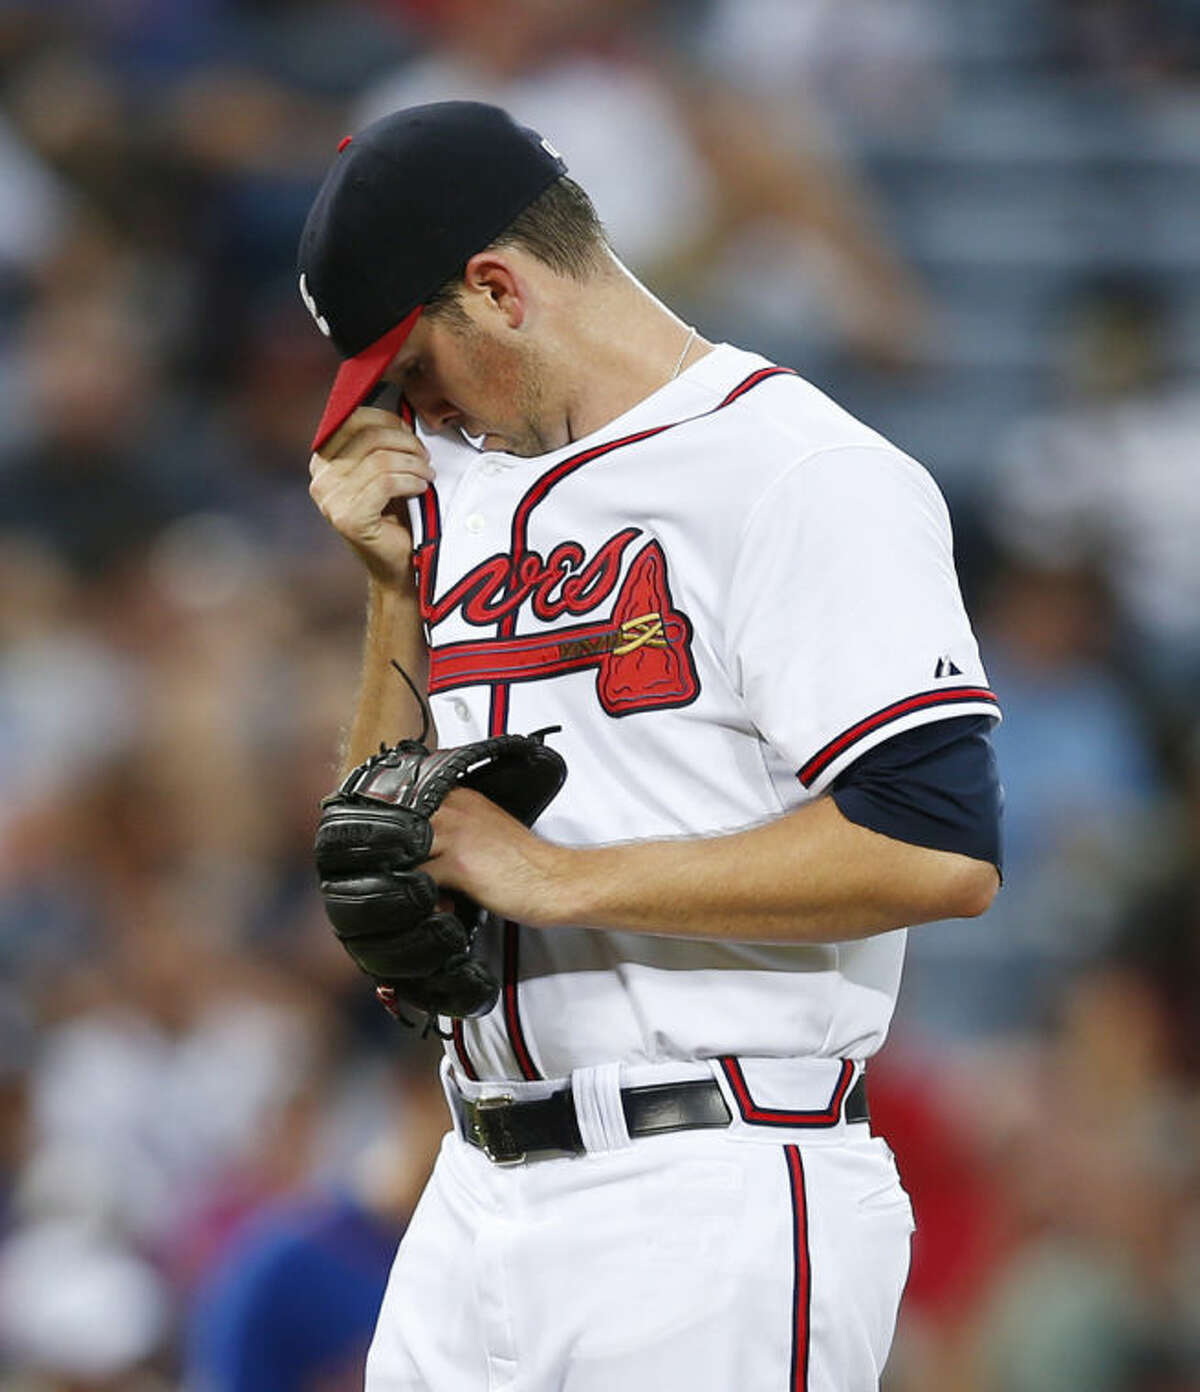 Atlanta Braves pitcher Alex Wood (40) wipes his face after loading the bases in the third inning of a baseball game against the New York Mets in Atlanta, Monday, June 30, 2014. (AP Photo/John Bazemore)